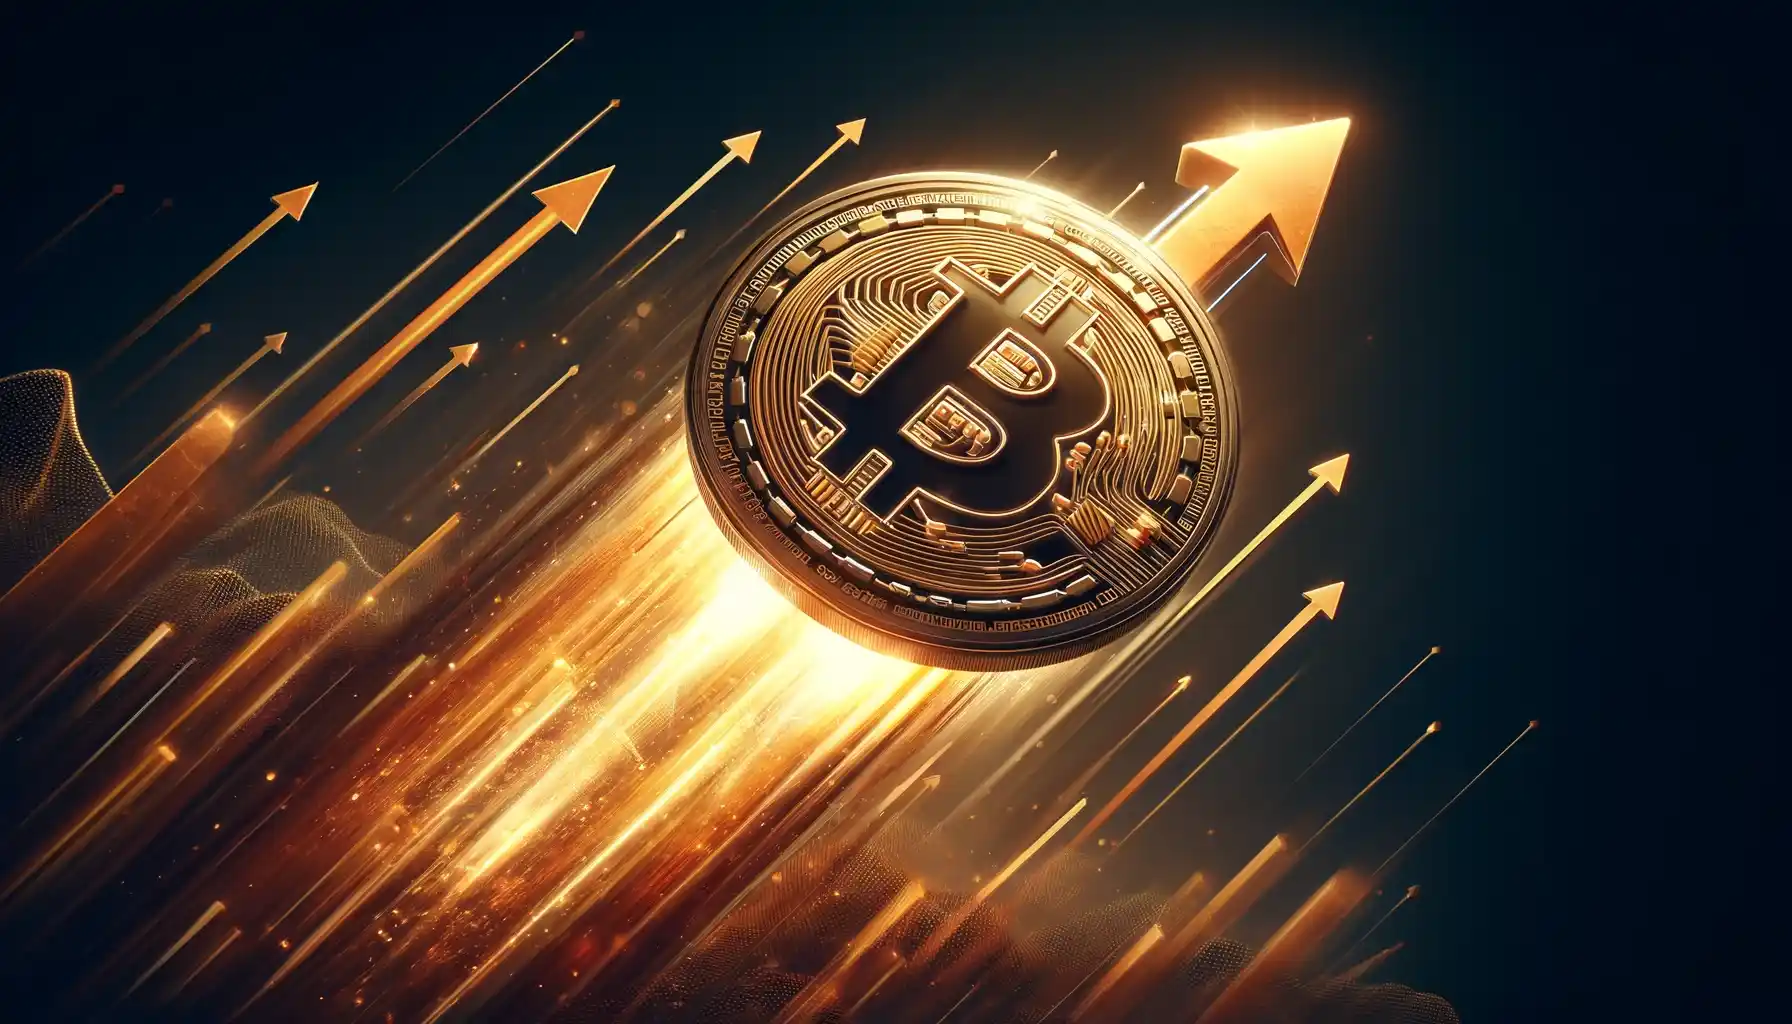 Ahead of 2024 halving, Bitcoin defies historical trends yet again – How?